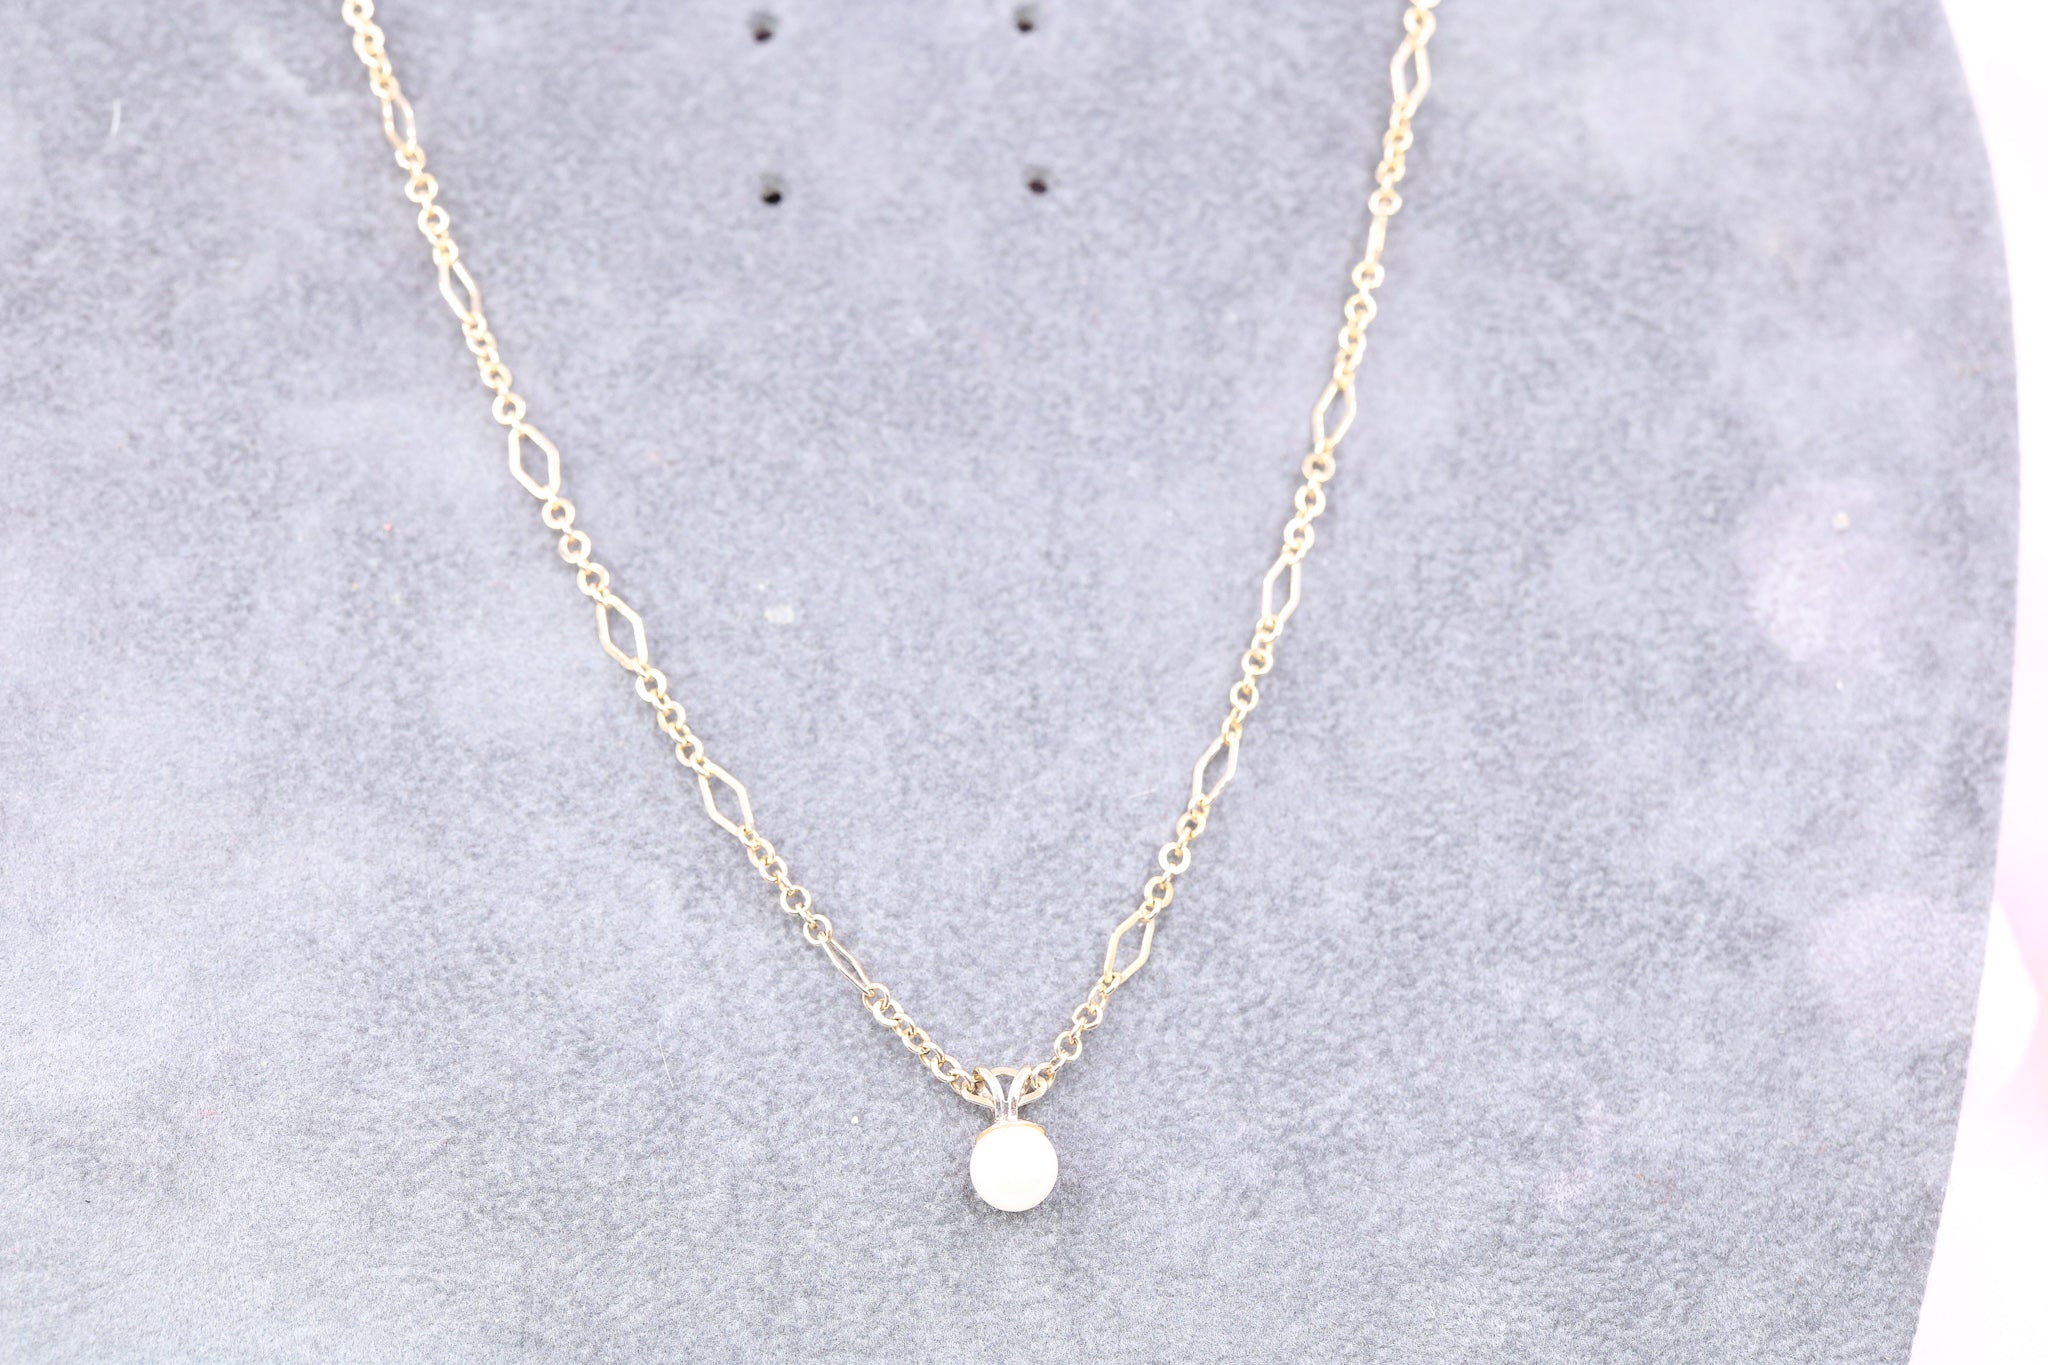 9ct Yellow Gold & Pearl Necklace - HJ2758 - Hallmark Jewellers Formby & The Jewellers Bench Widnes